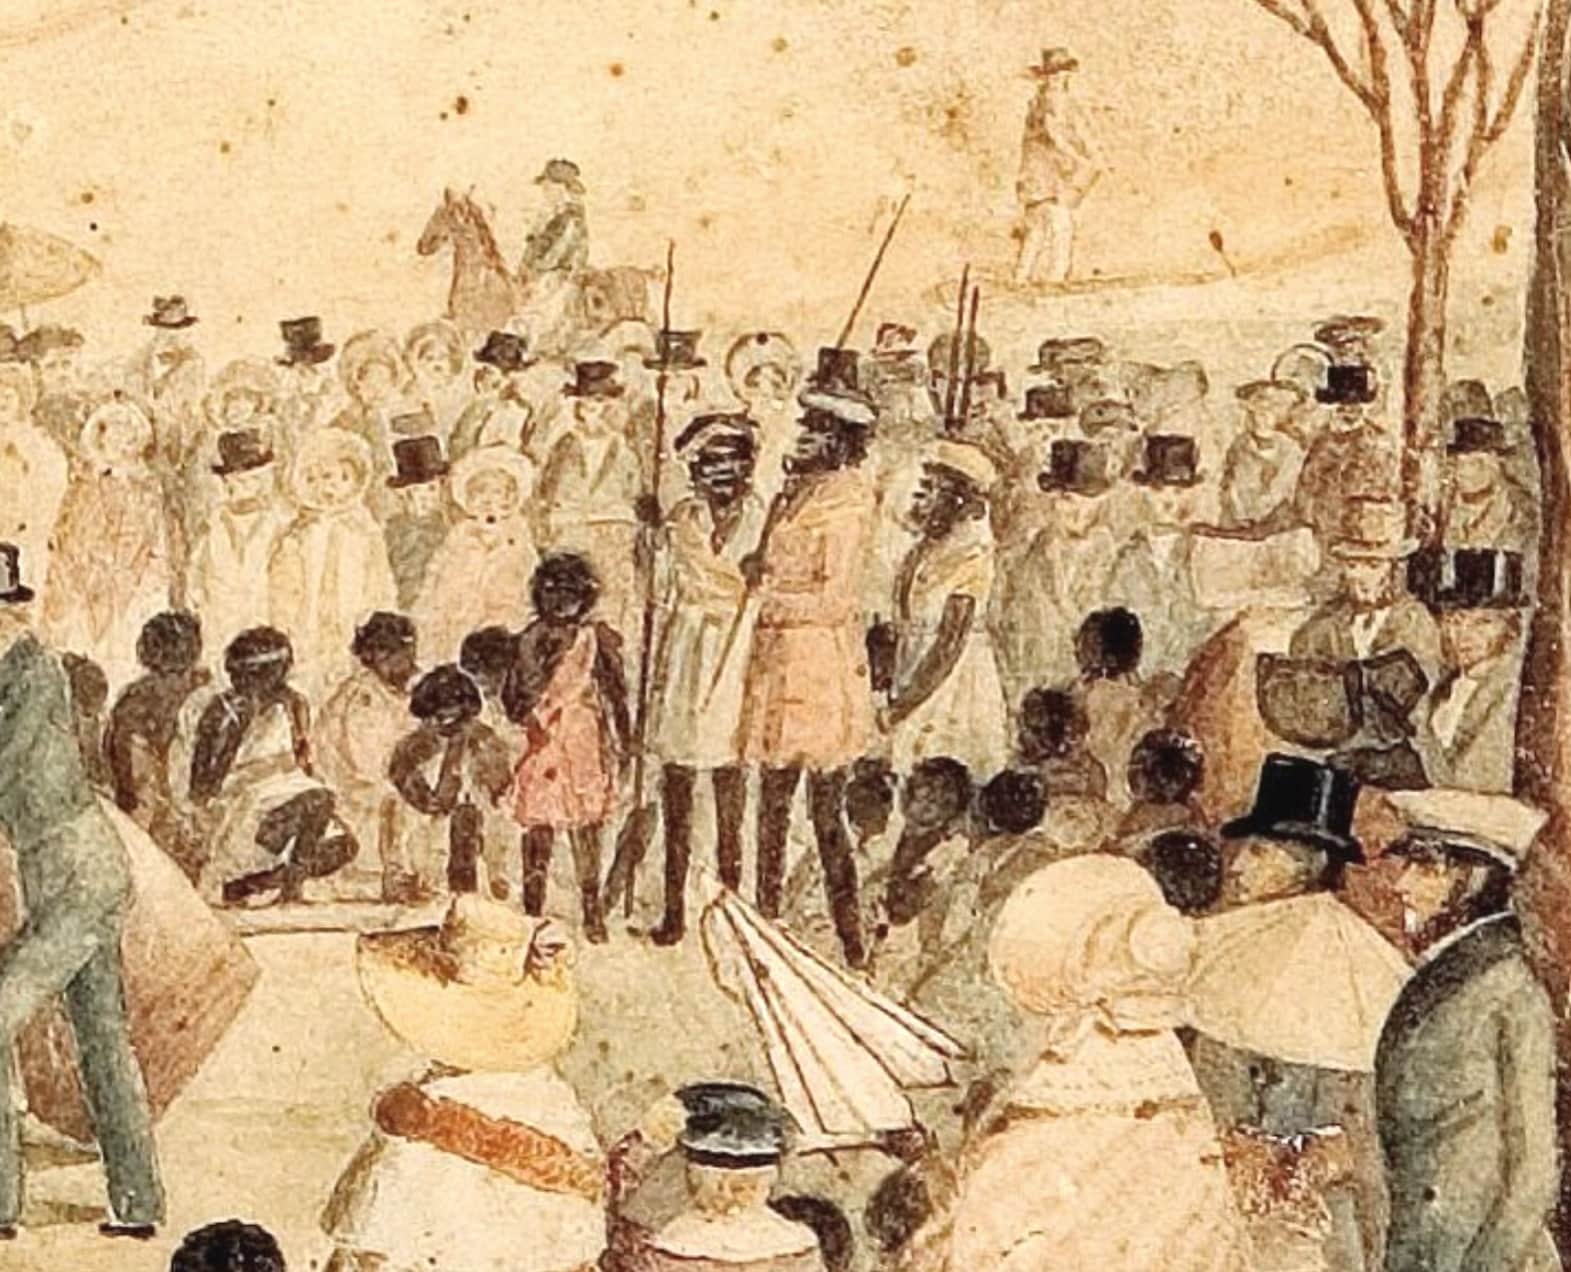 Detail, The first dinner given to the Aborigines, 1838, by Martha Berkeley (Art Gallery of South Australia)